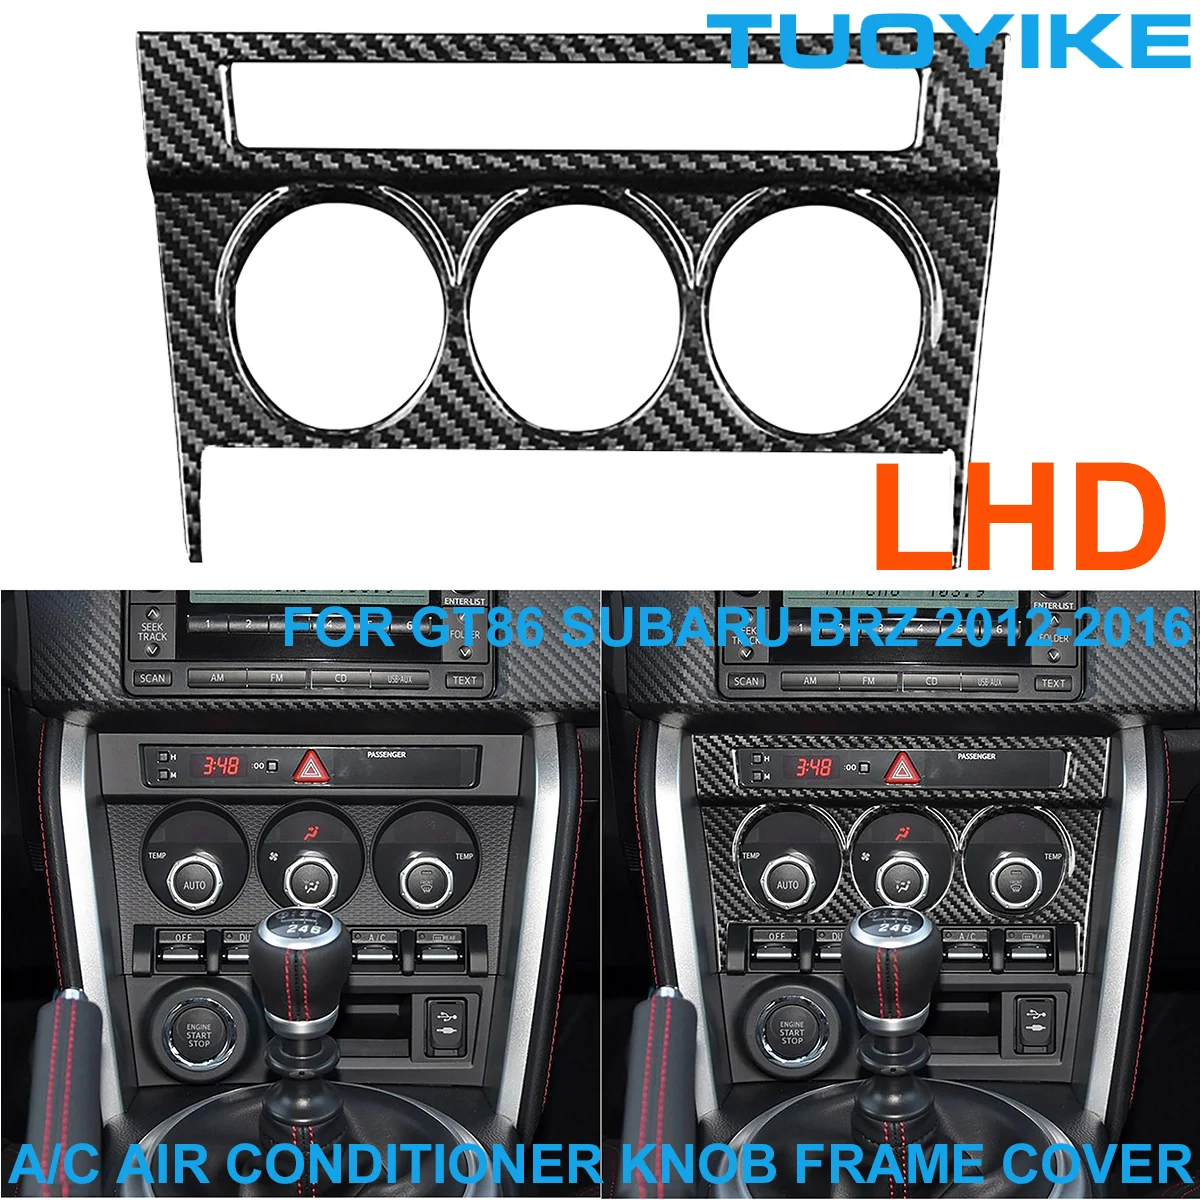 

LHD Car Styling Real Carbon Fiber Dashboard AC Air Conditioner Knob Frame Cover Trim Panel For Toyota GT86 Subaru BRZ 2012-2016